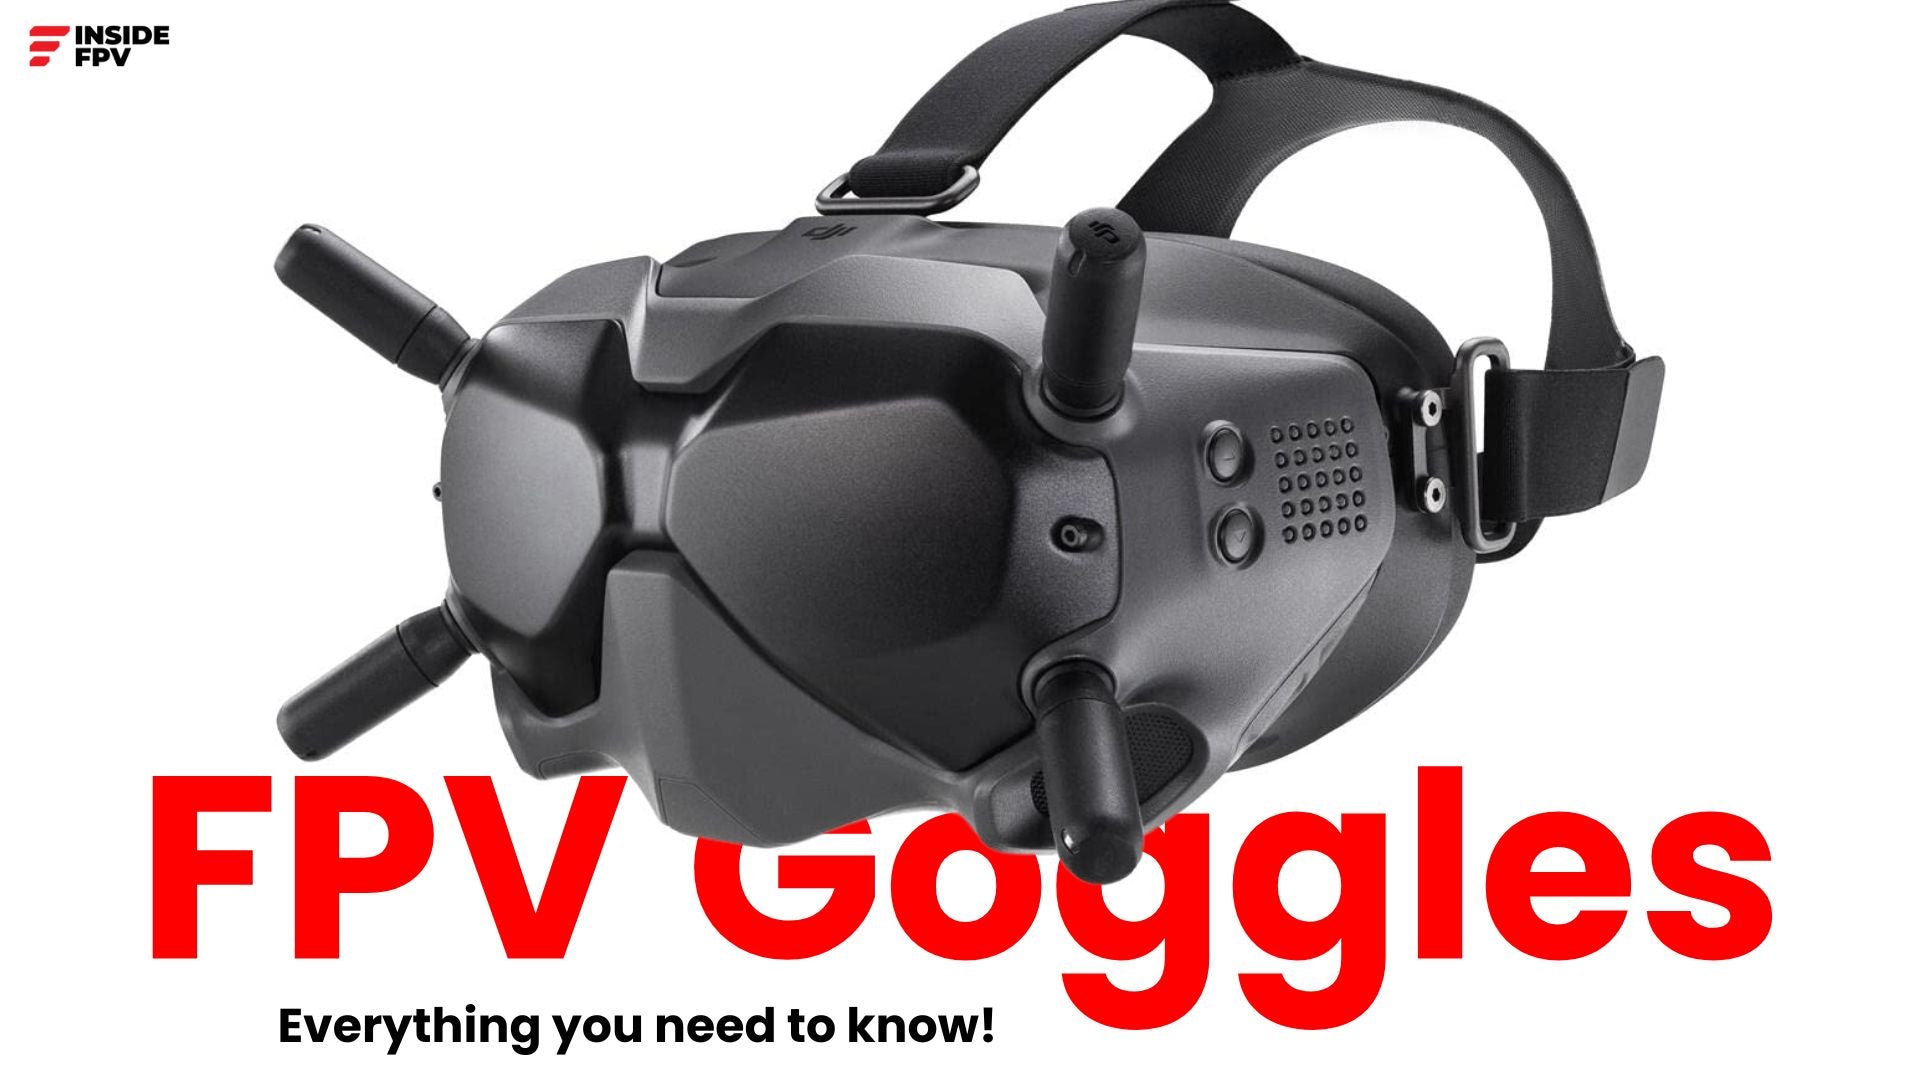 What are FPV Goggles?